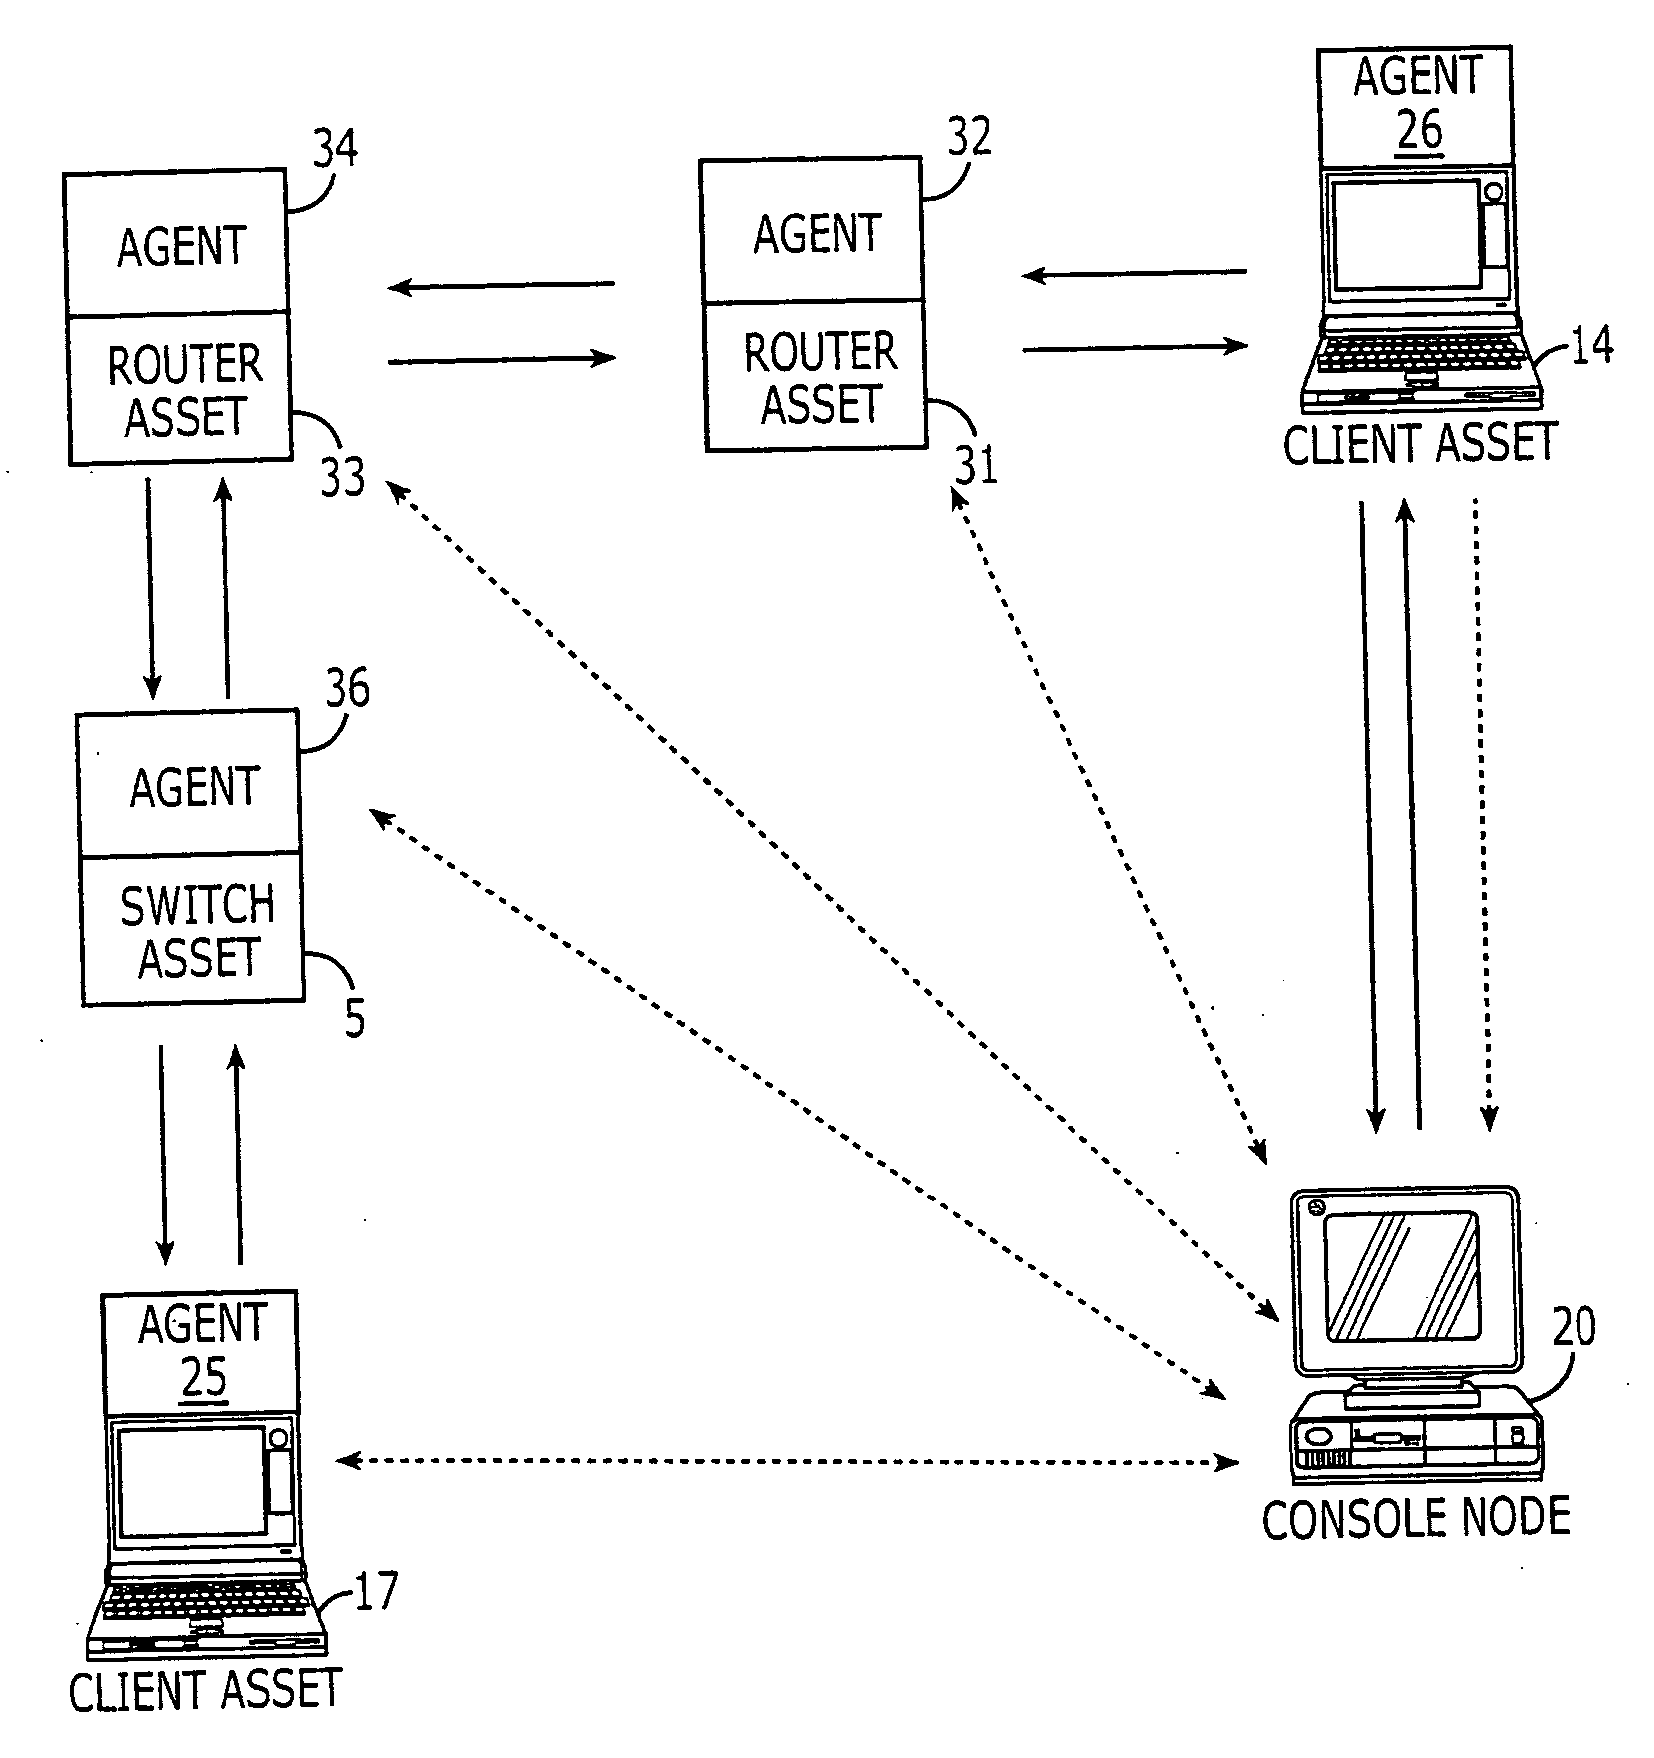 Methods, systems and computer program products for evaluating security of a network environment